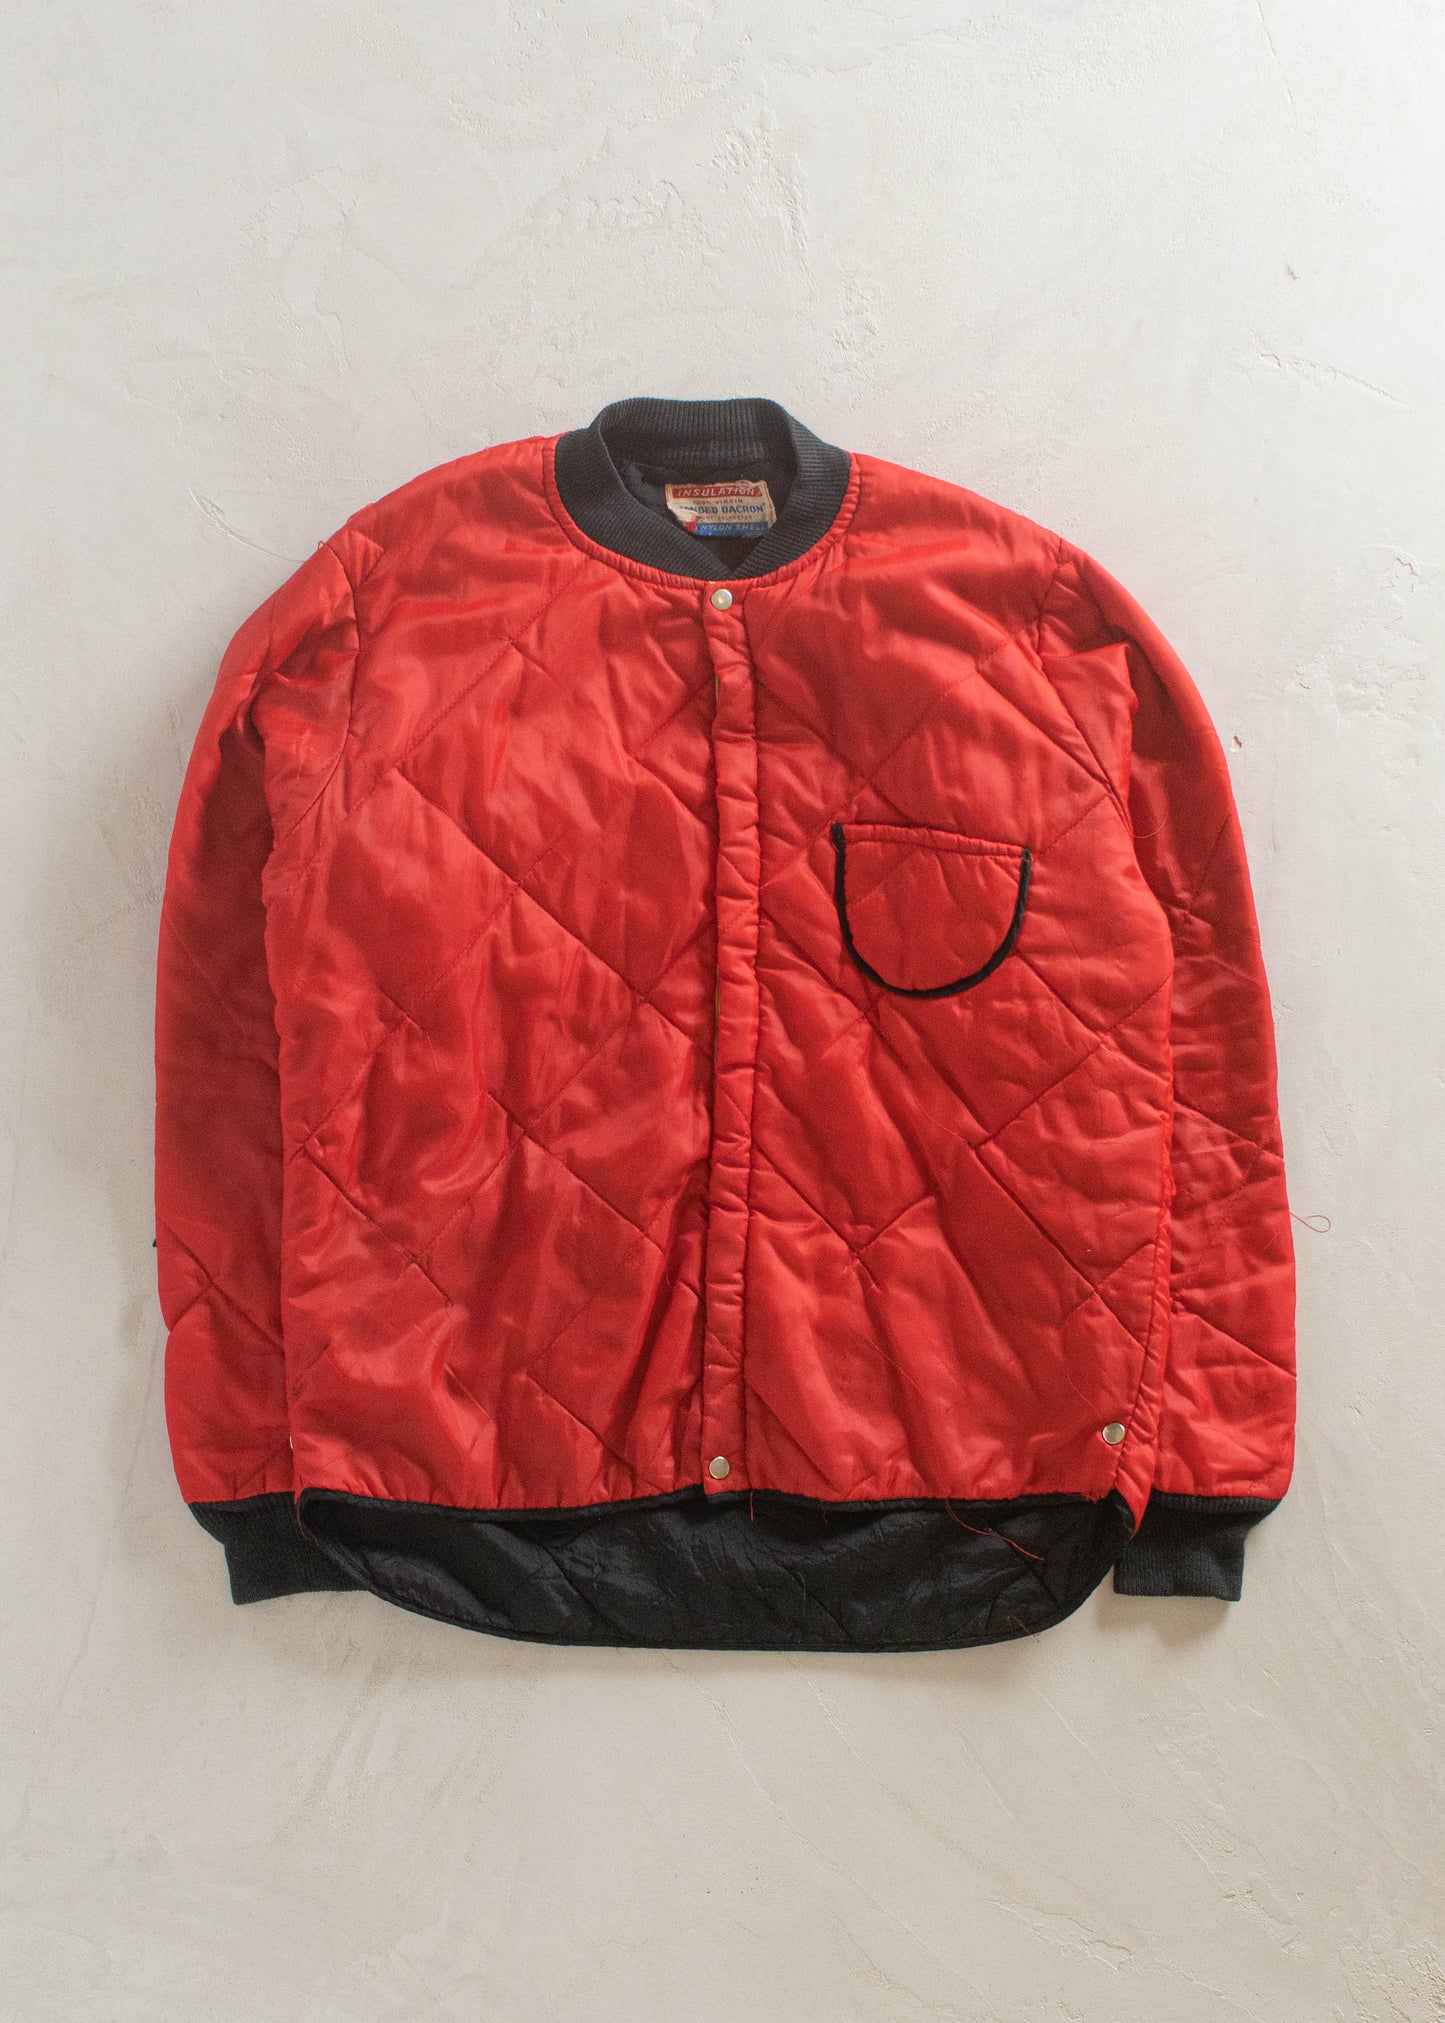 1980s Quilted Liner Jacket Size S/M